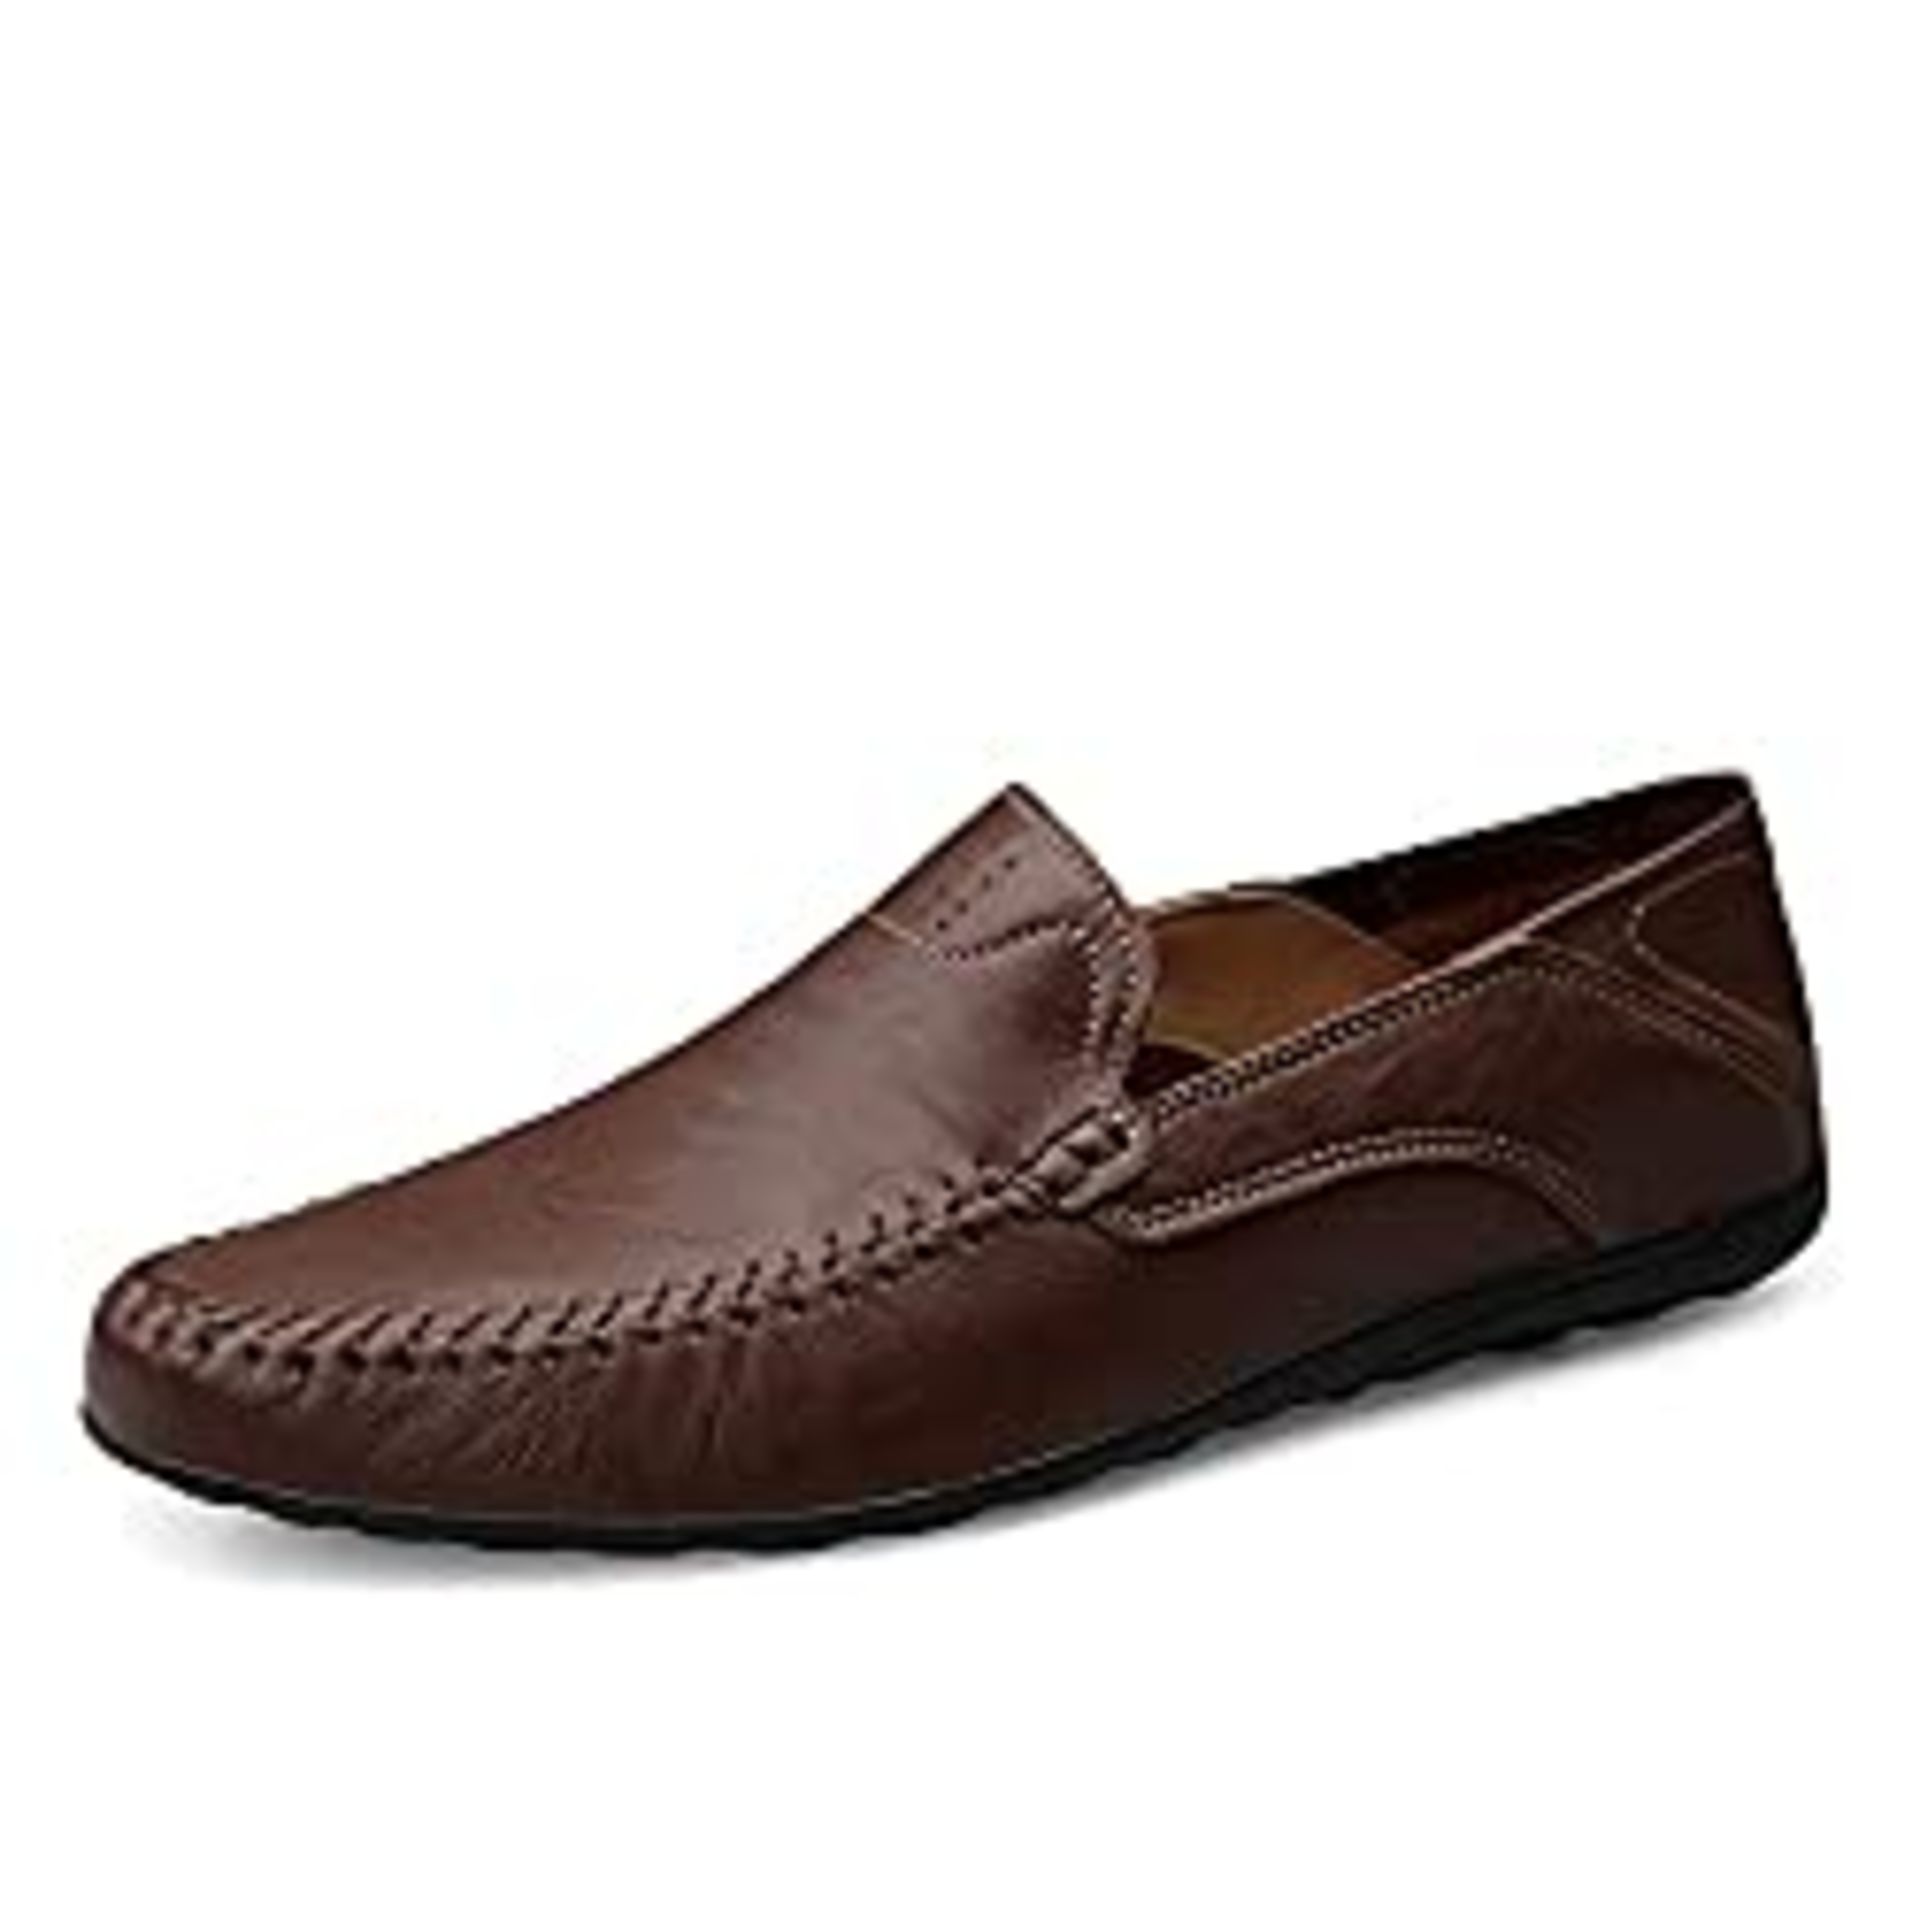 RRP £37.95 Mens Genuine Leather Casual Shoes Driving Shoes Fashion Slip-on Loafers Brown 7